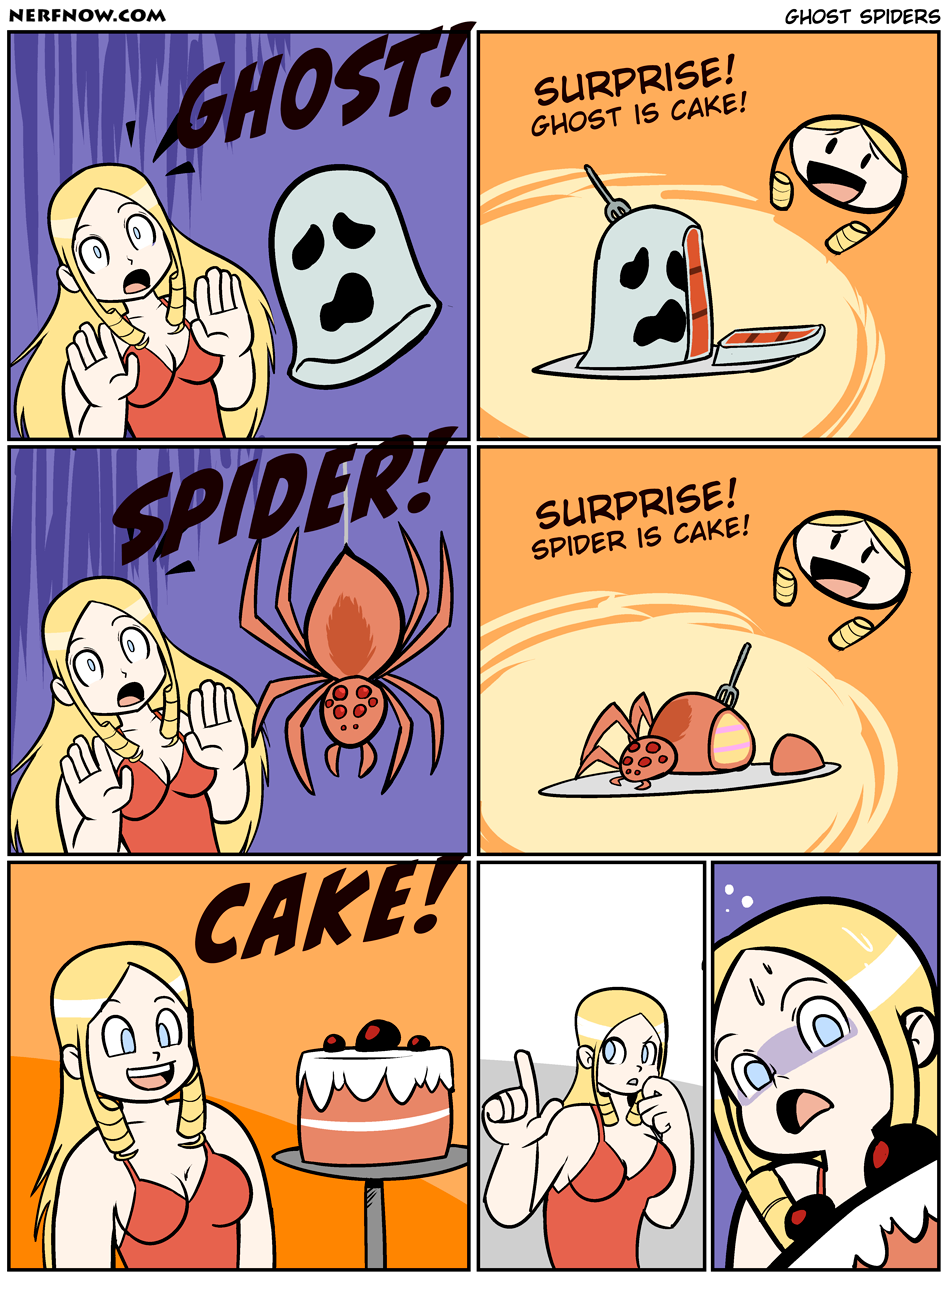 Ghost Spiders